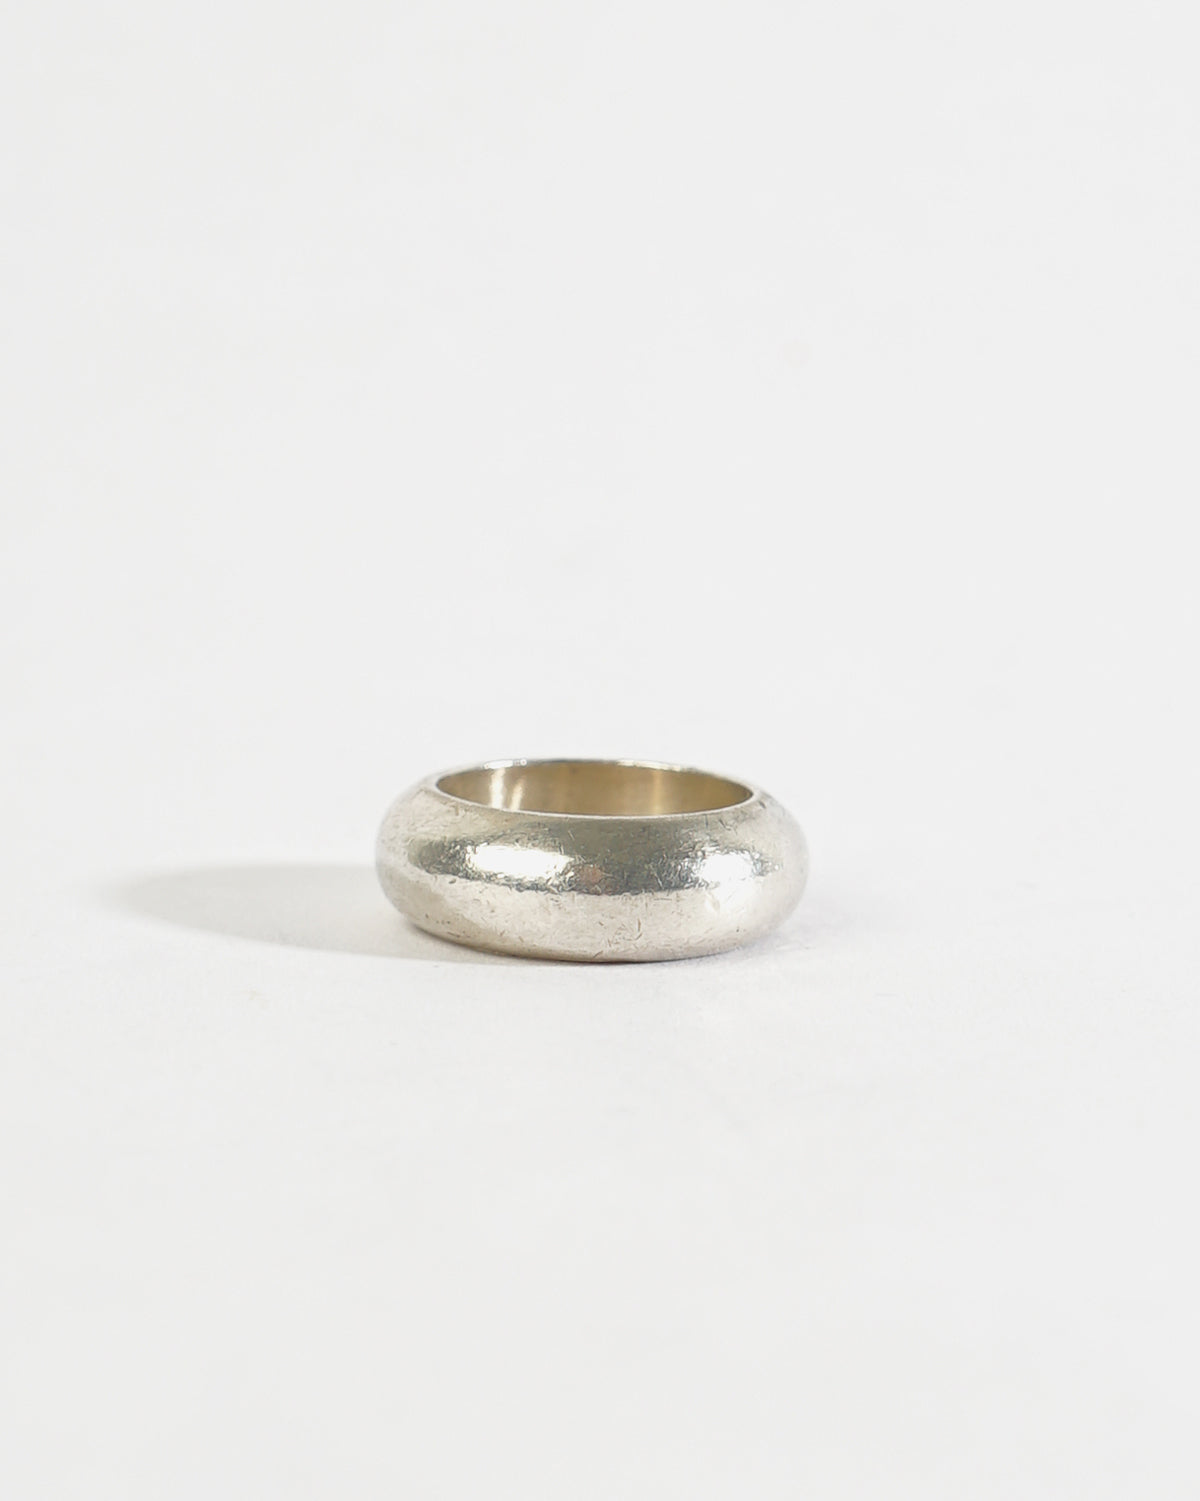 Silver Band Ring / size: 8.5